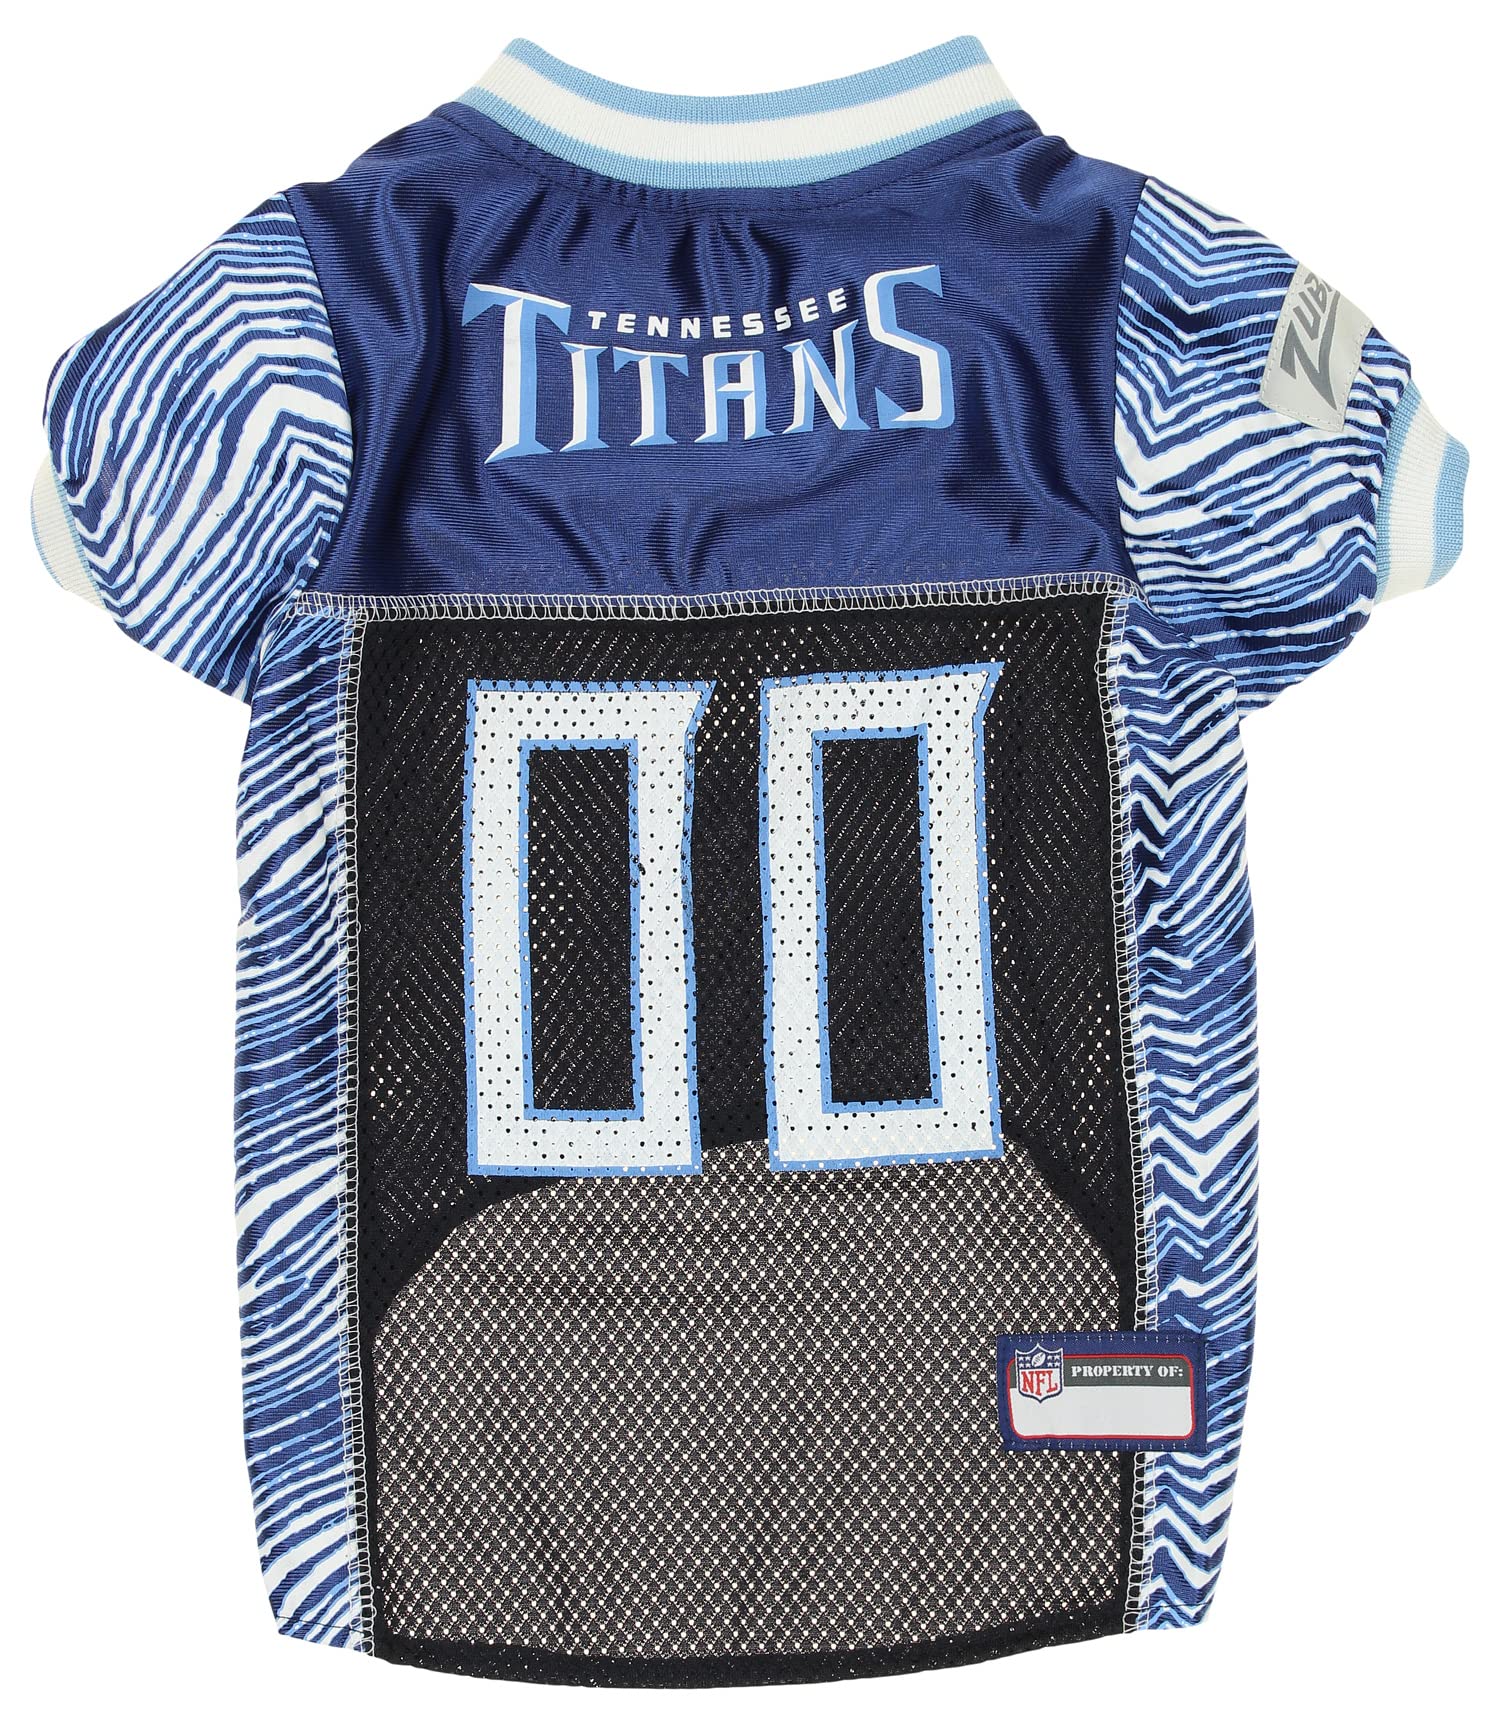 Zubaz NFL Team Pet Jersey for Dogs, Tennessee Titans, Large